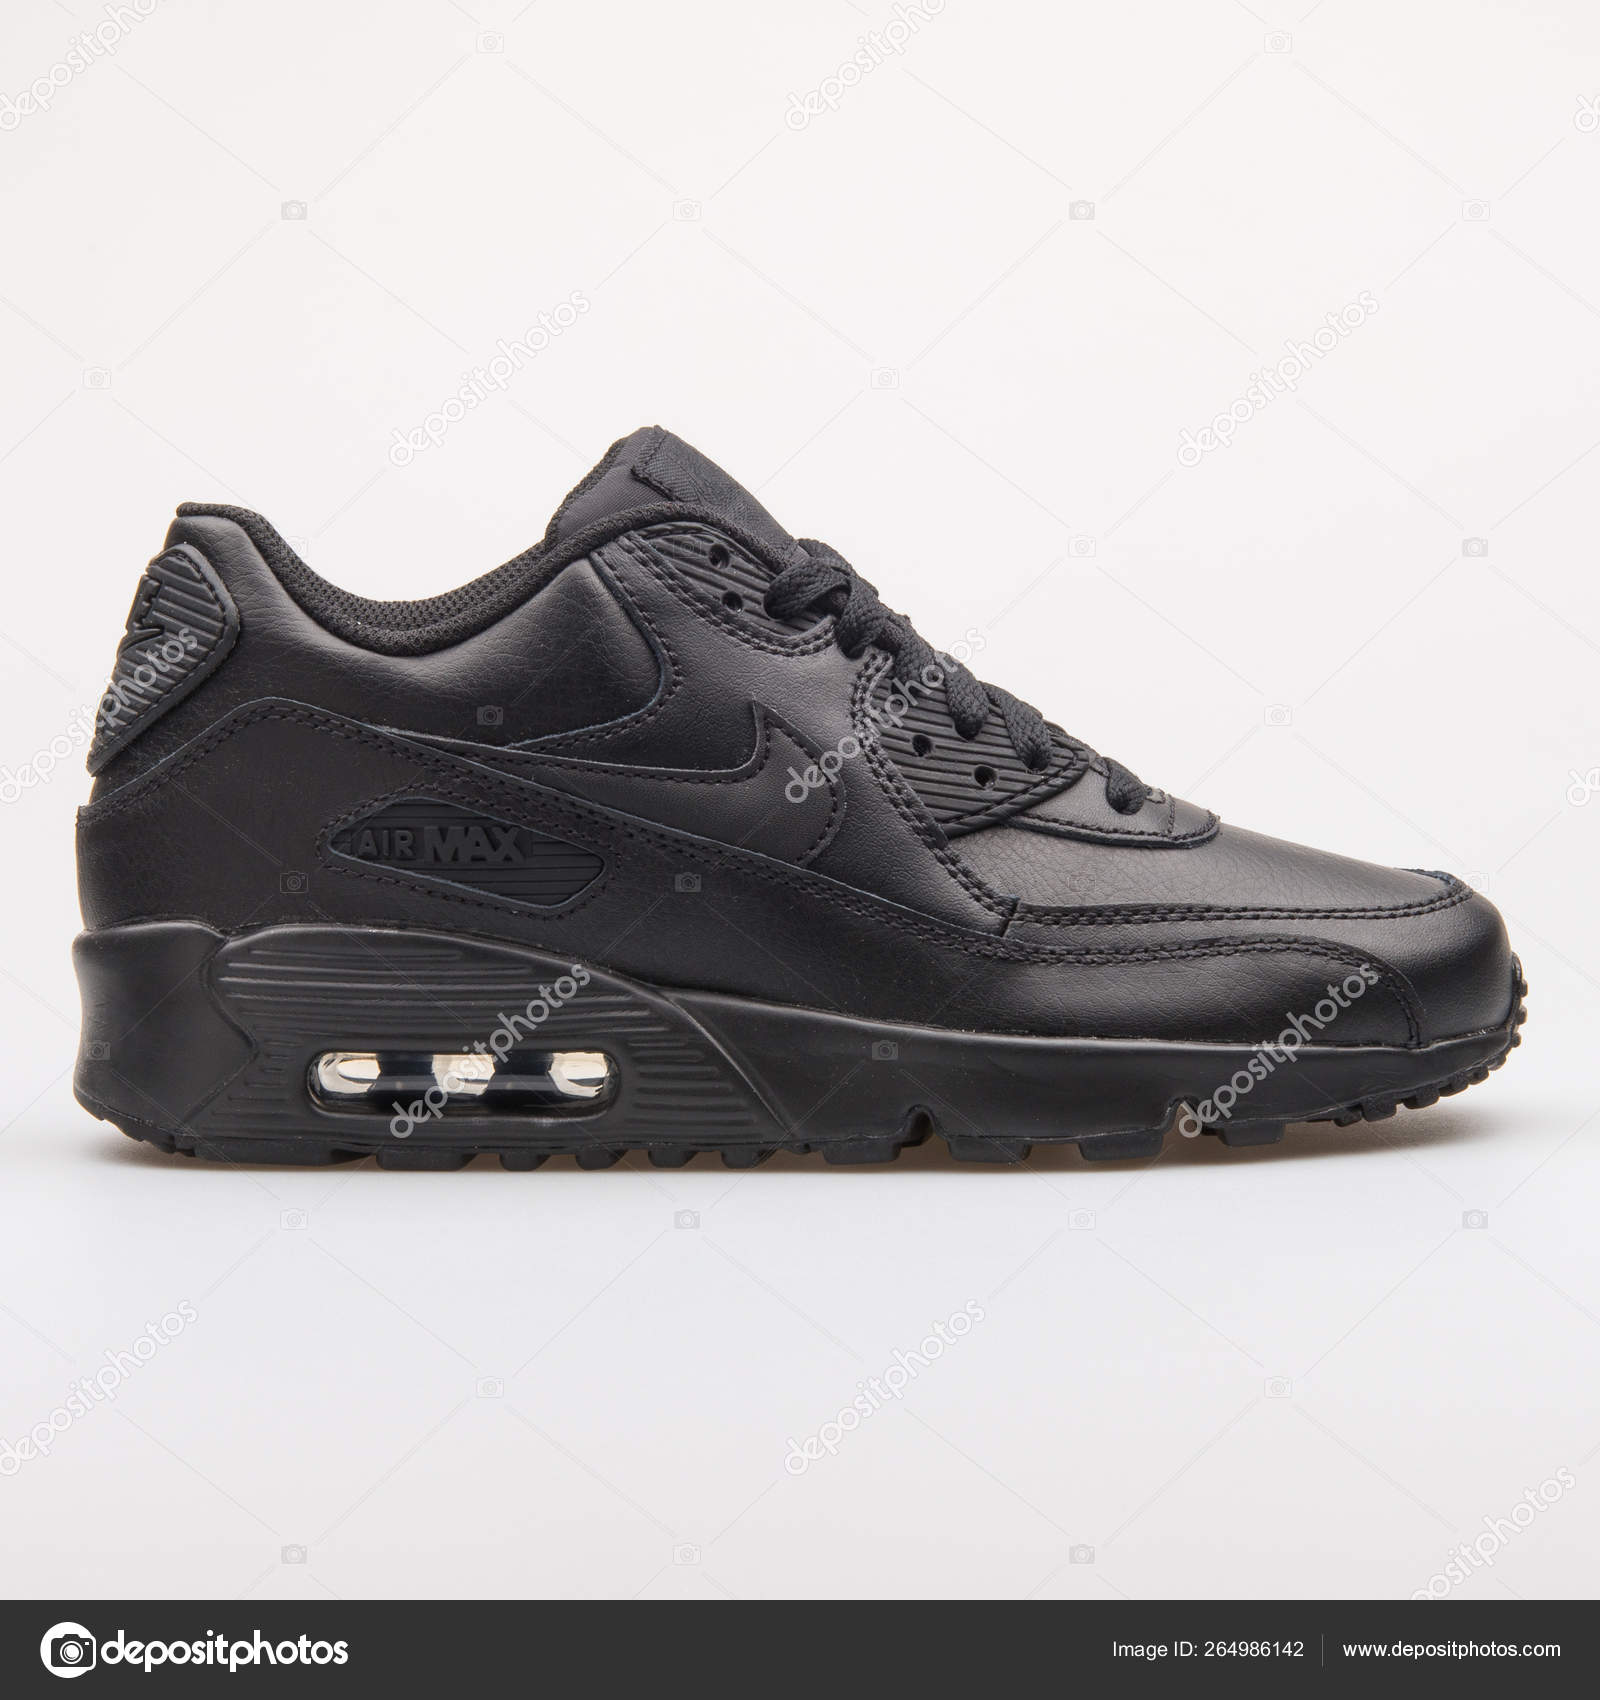 nike air max 90 leather sneaker